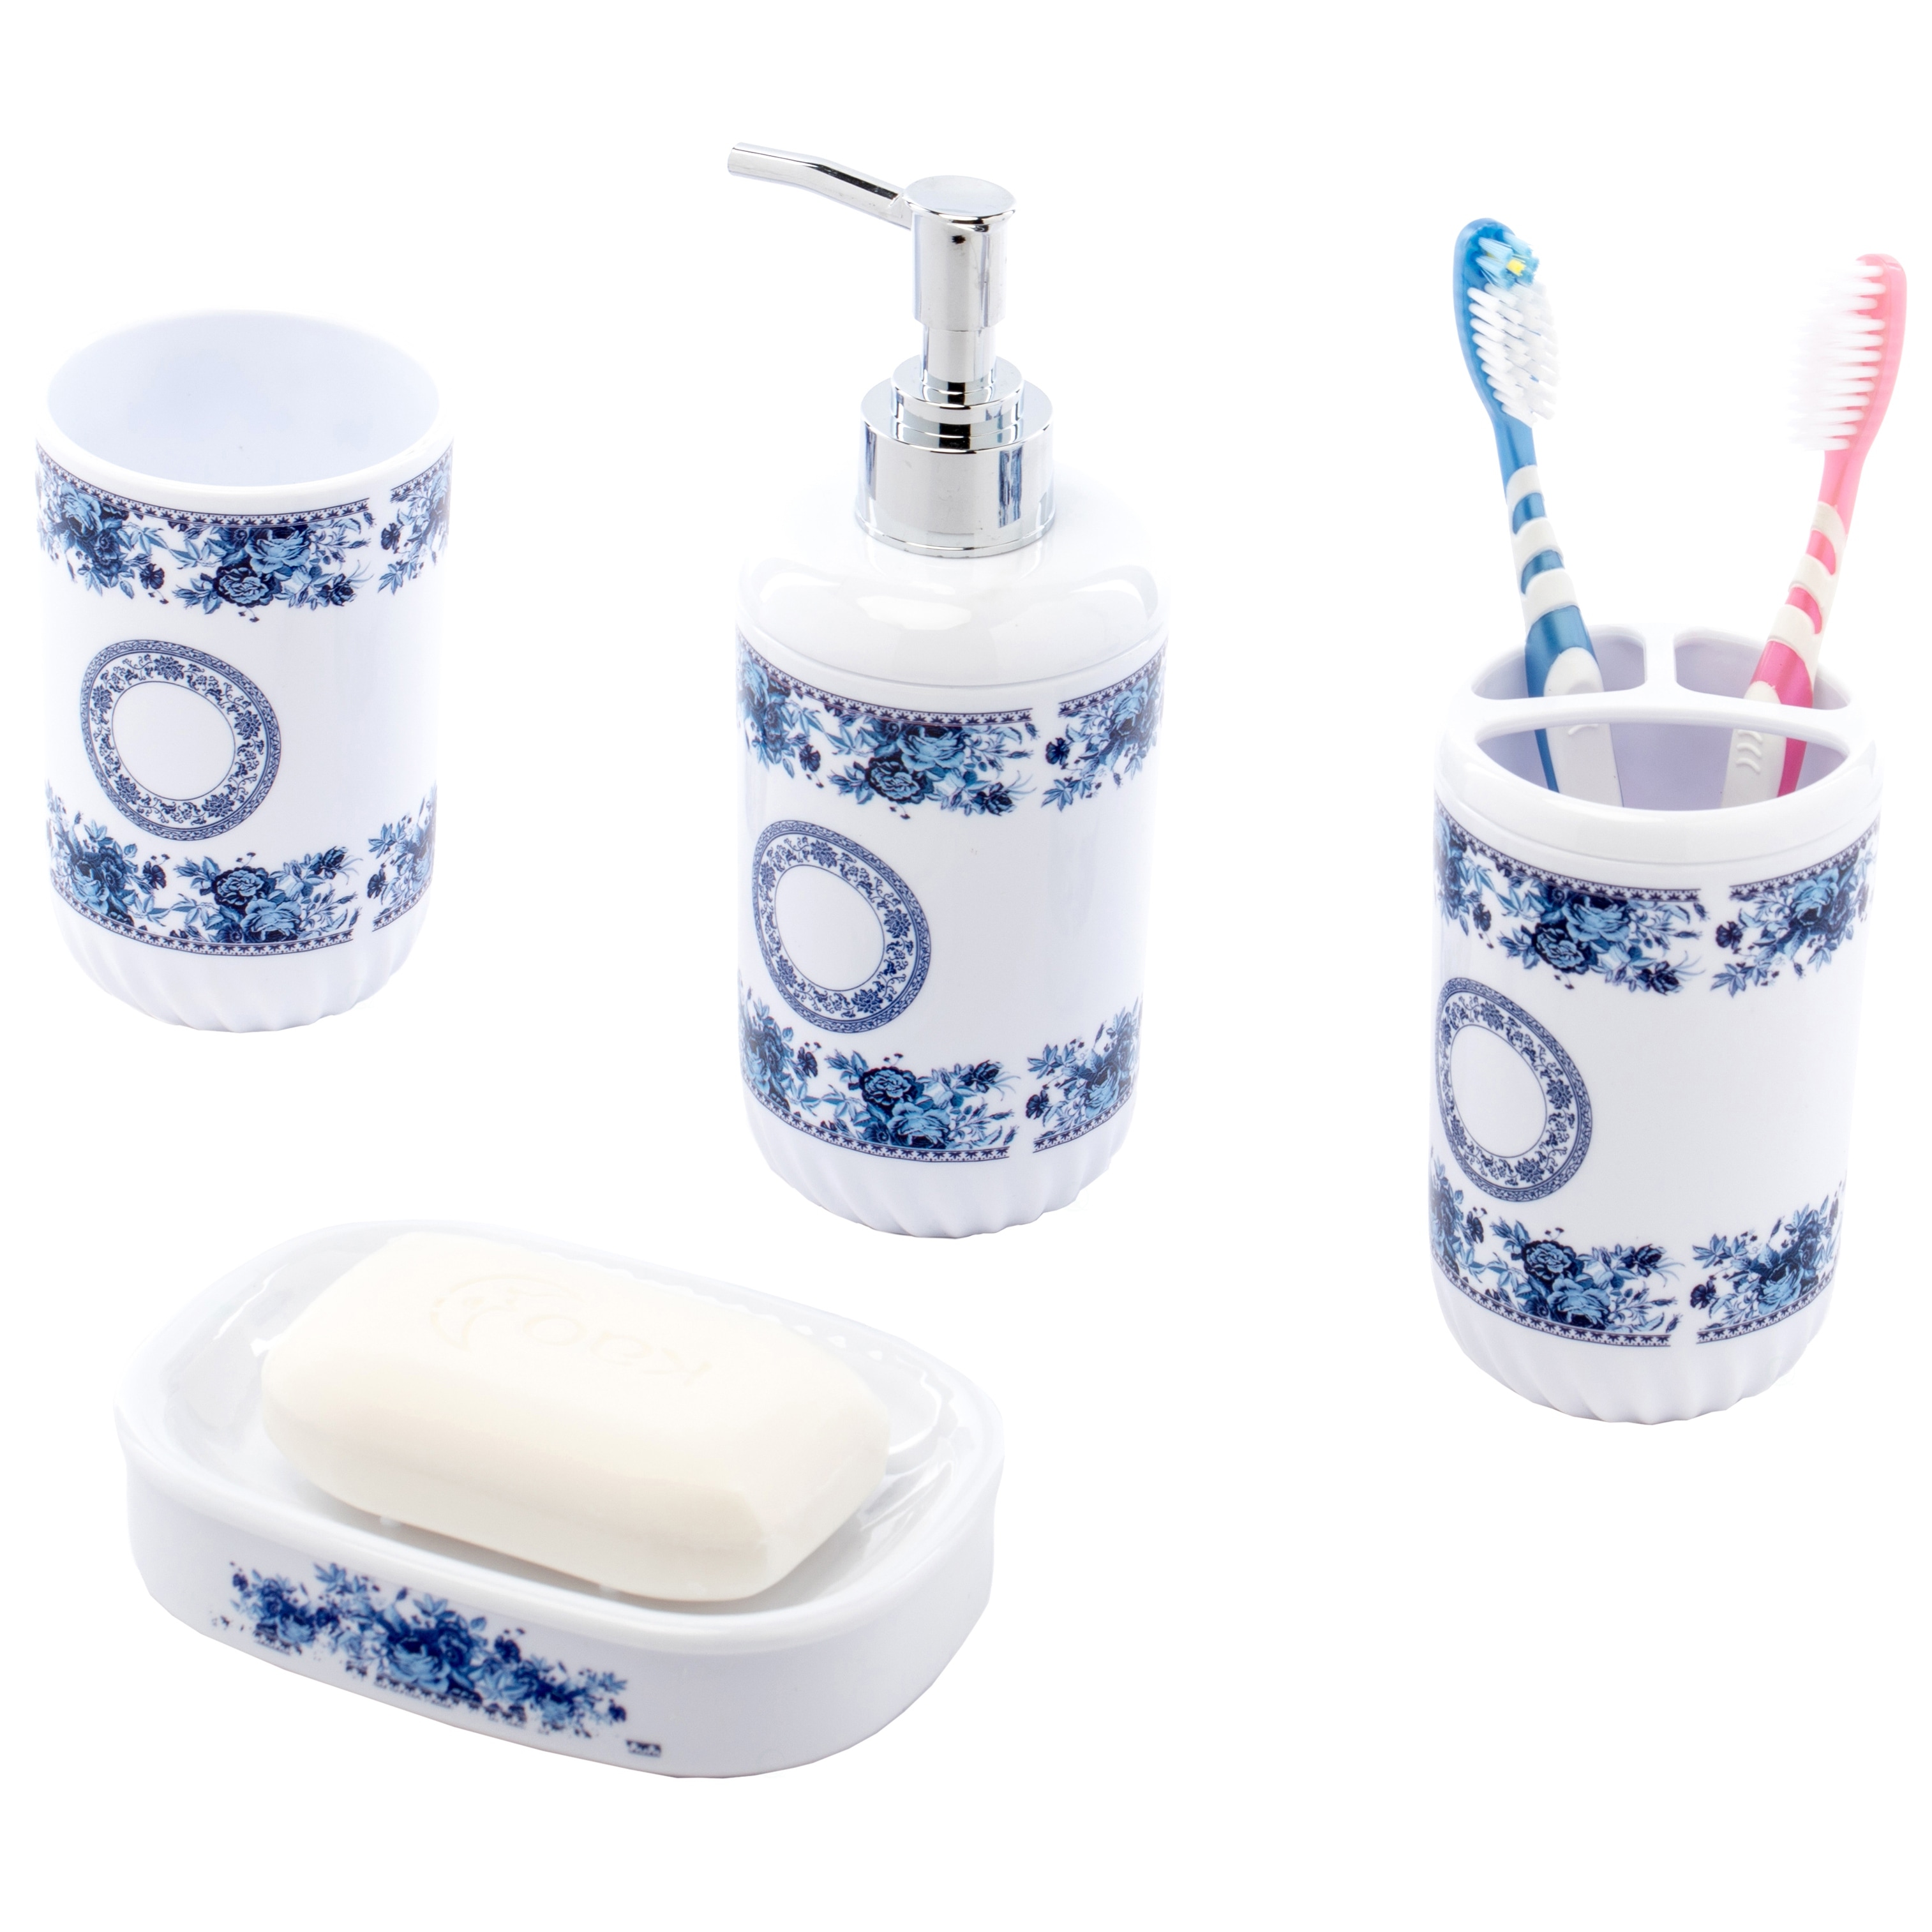 Details about  / 4x Bathroom Accessories Set Resin Tumbler Toothbrush Dispenser Soap Dish Holder